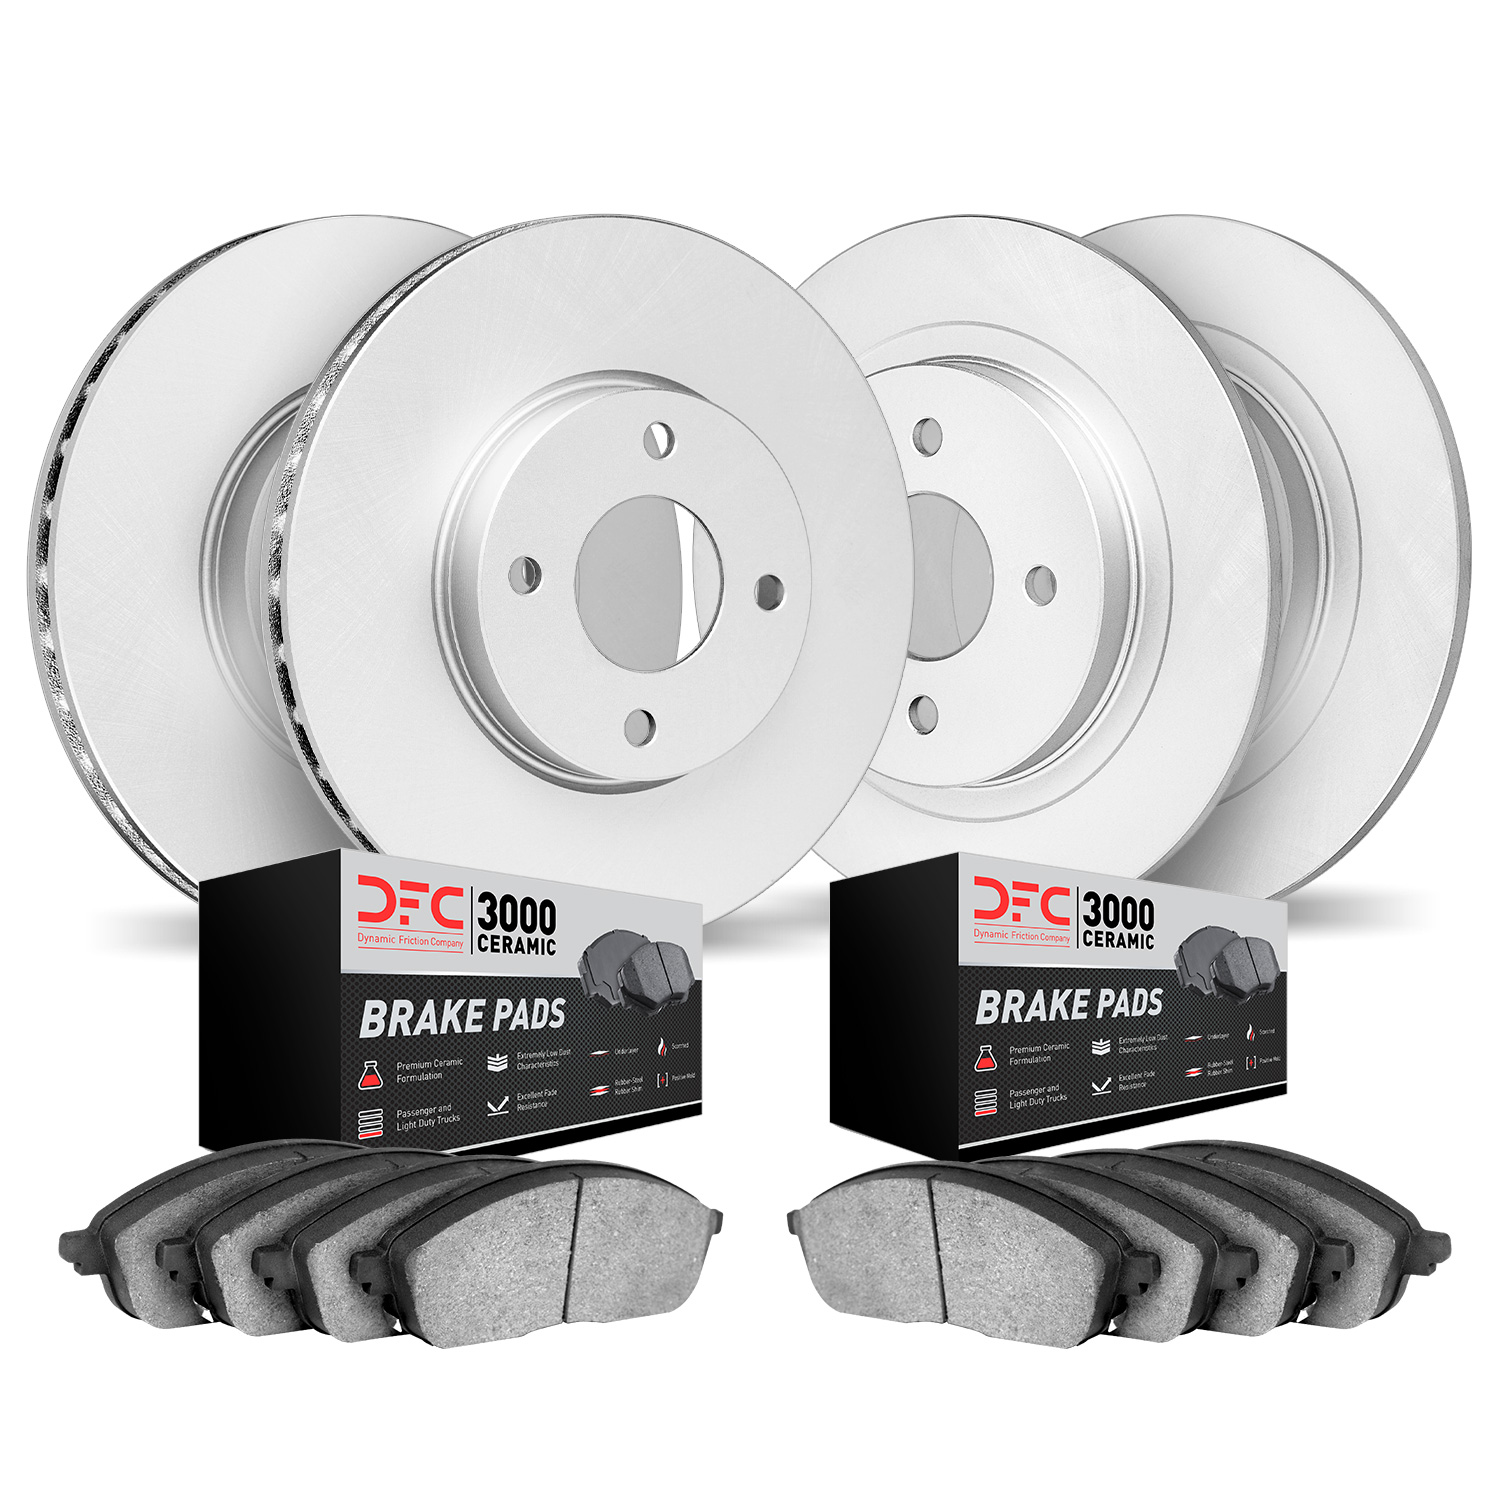 4304-59054 Geospec Brake Rotors with 3000-Series Ceramic Brake Pads Kit, 2001-2005 Acura/Honda, Position: Front and Rear